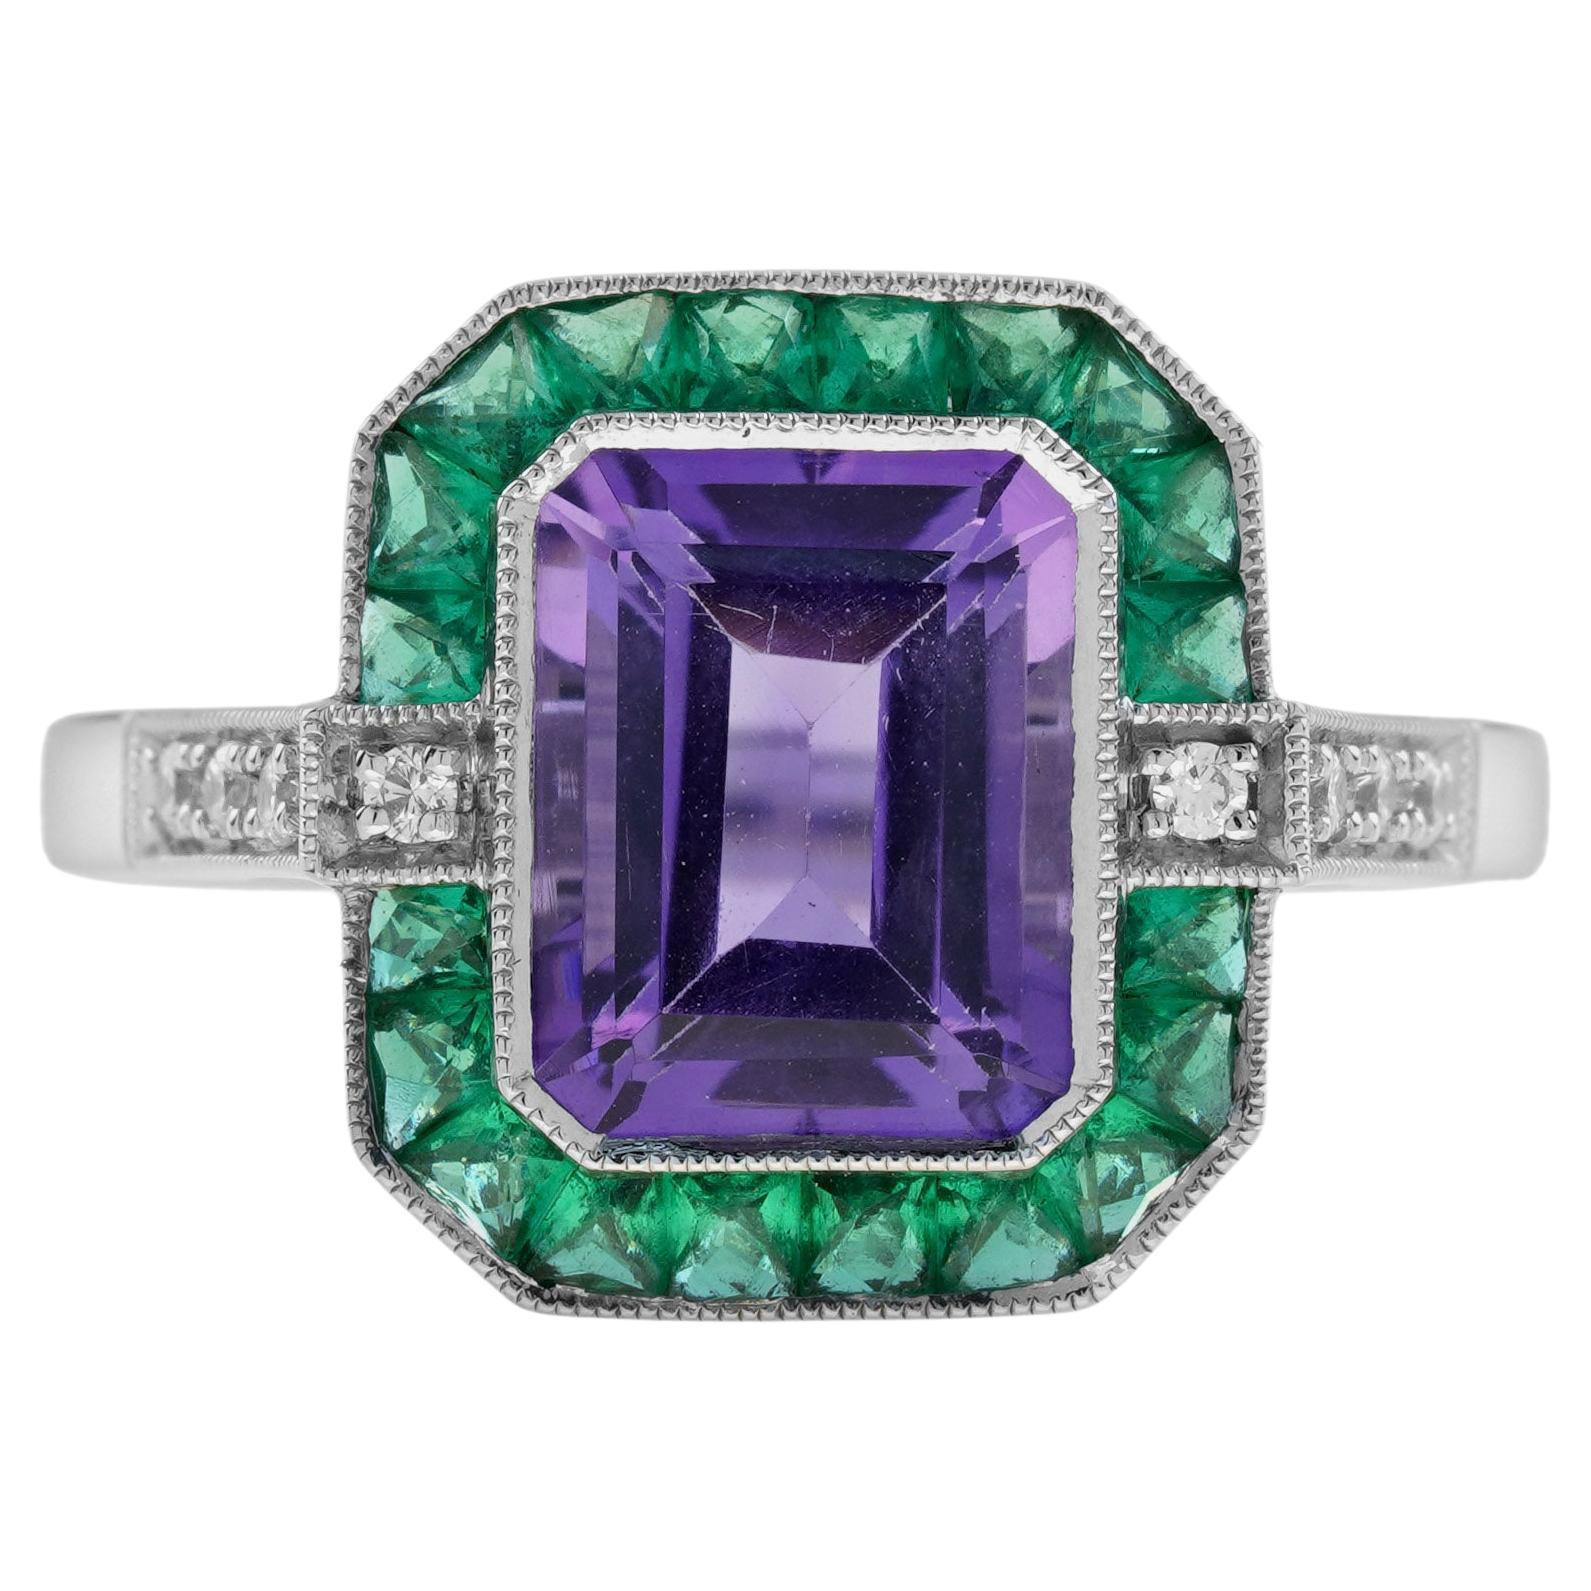 For Sale:  Emerald Cut Amethyst Emerald and Diamond Art Deco Style Ring in 14K White Gold